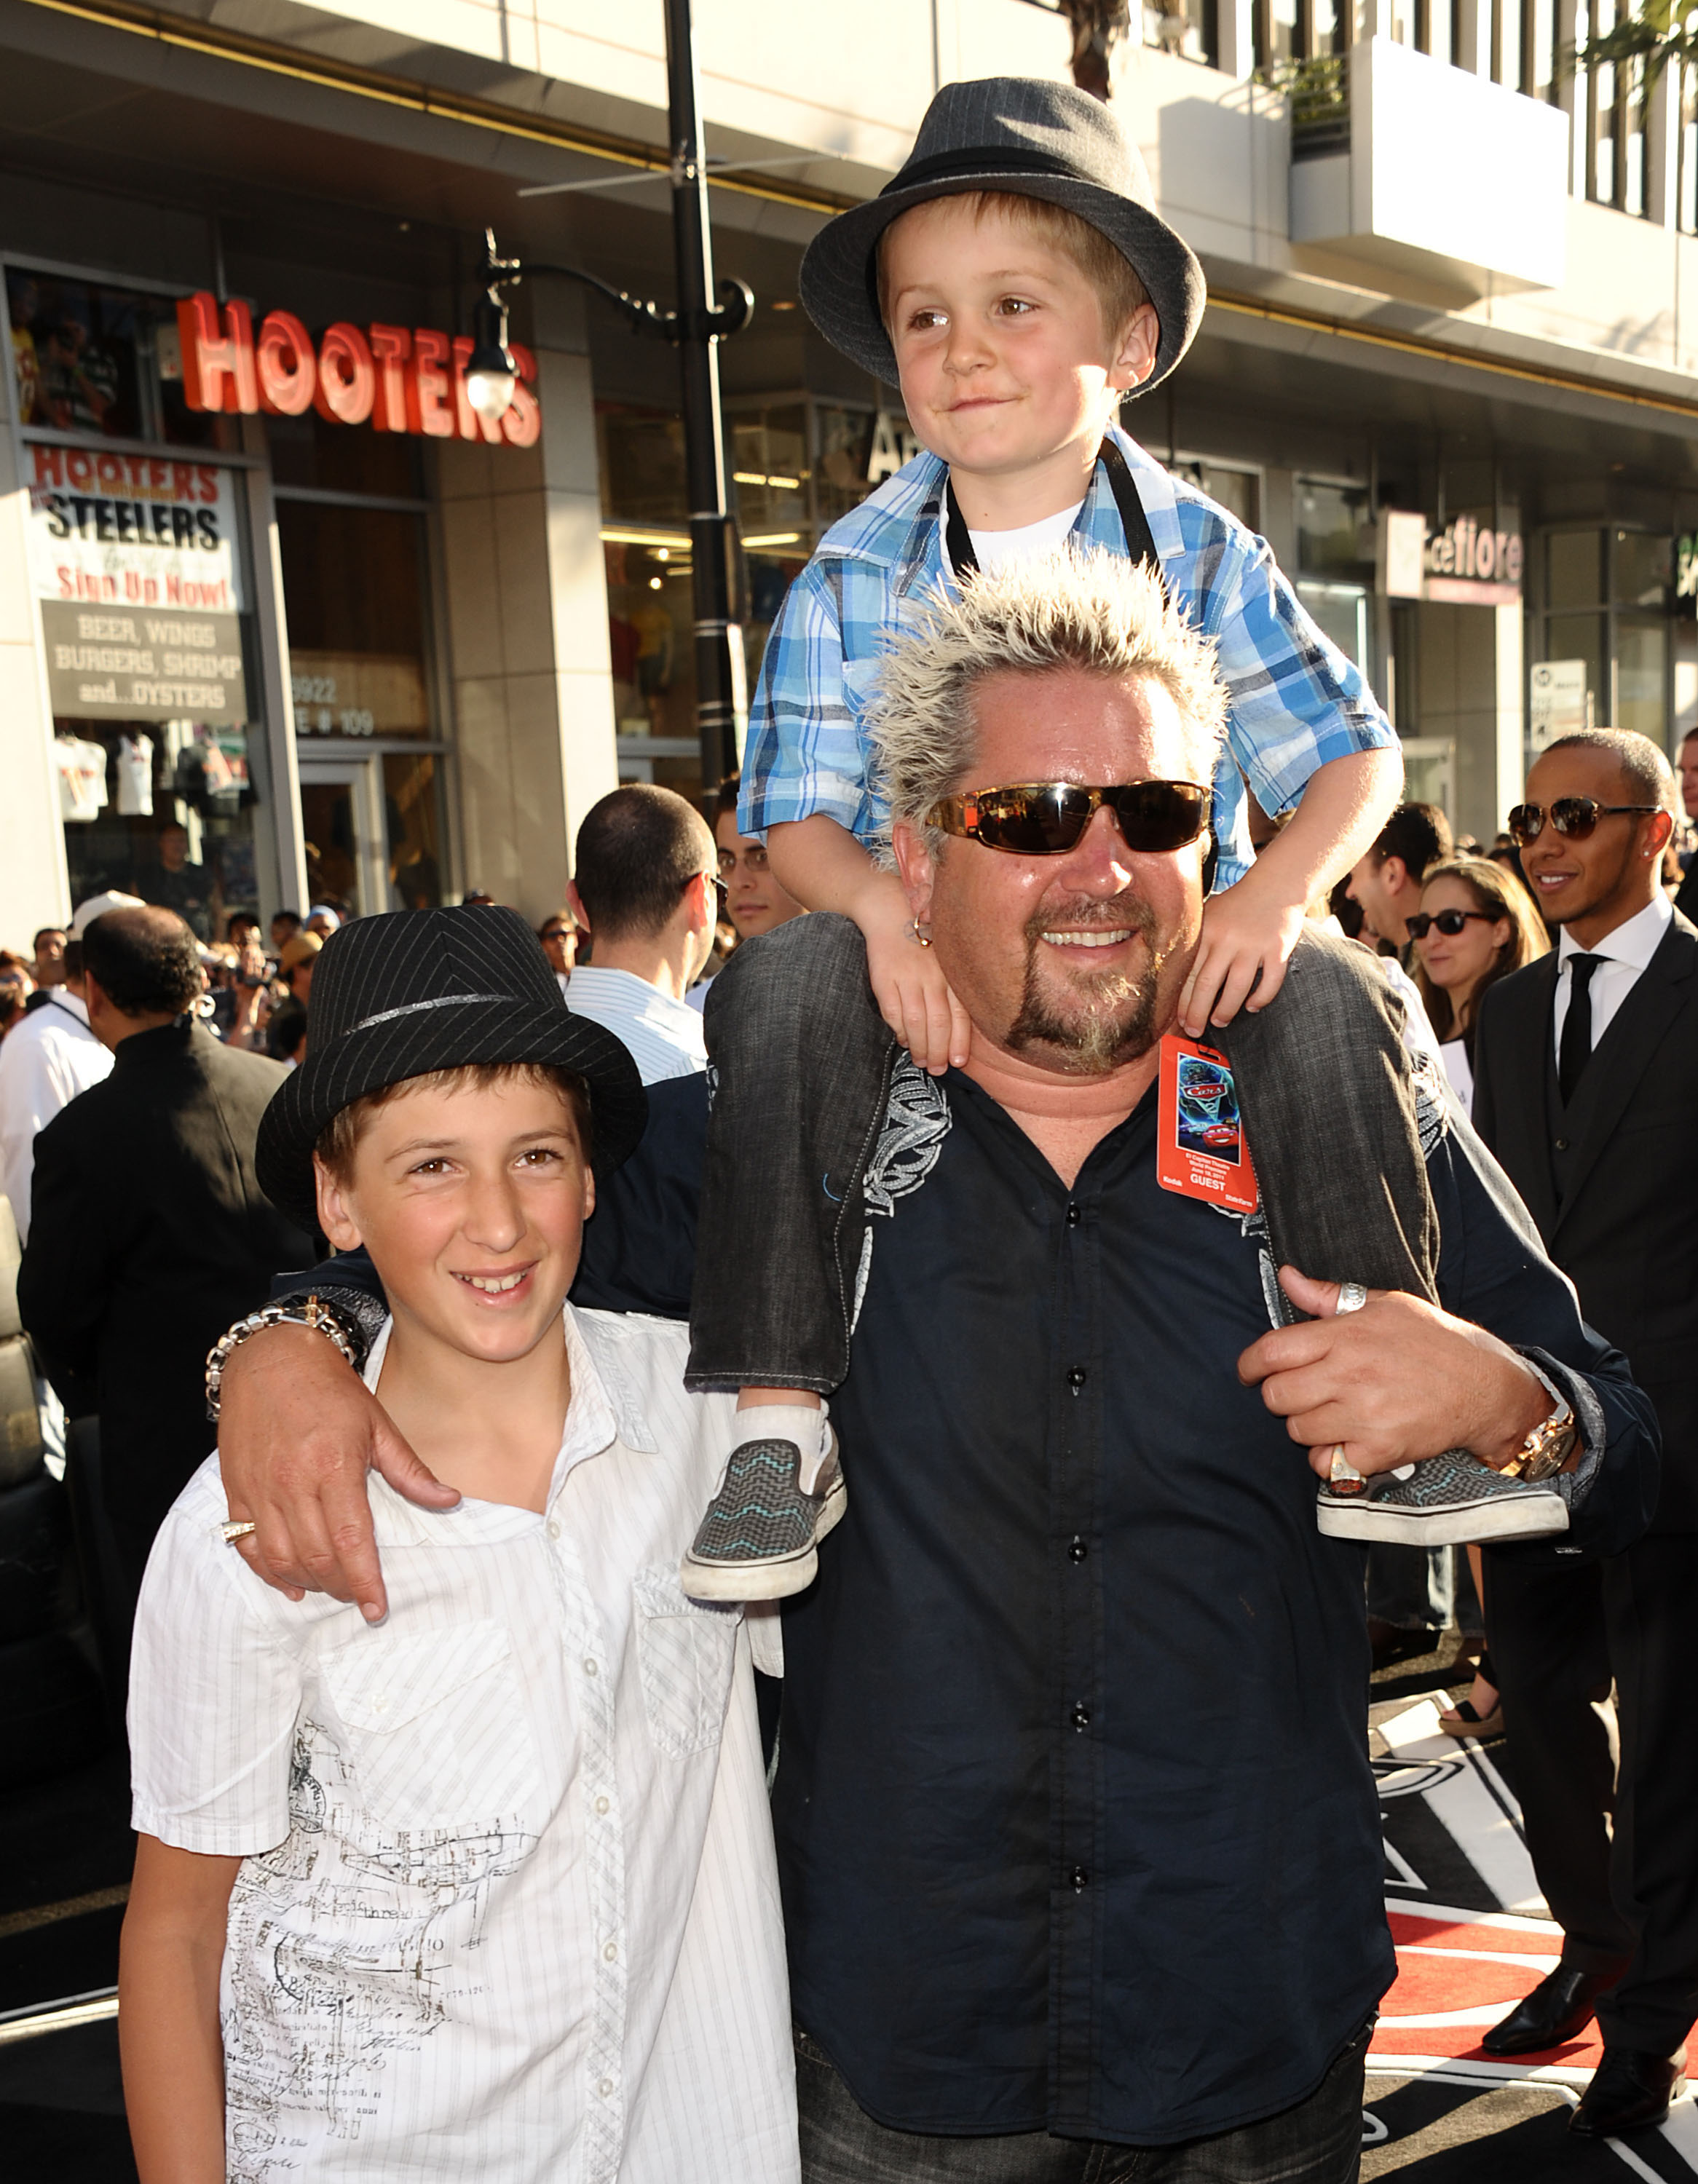 Guy Fieri and sons Ryder and Hunter at the premiere of Disney/Pixar's "Cars 2" at the El Capitan Theatre on June 18, 2011 in Hollywood, California | Source: Getty Images